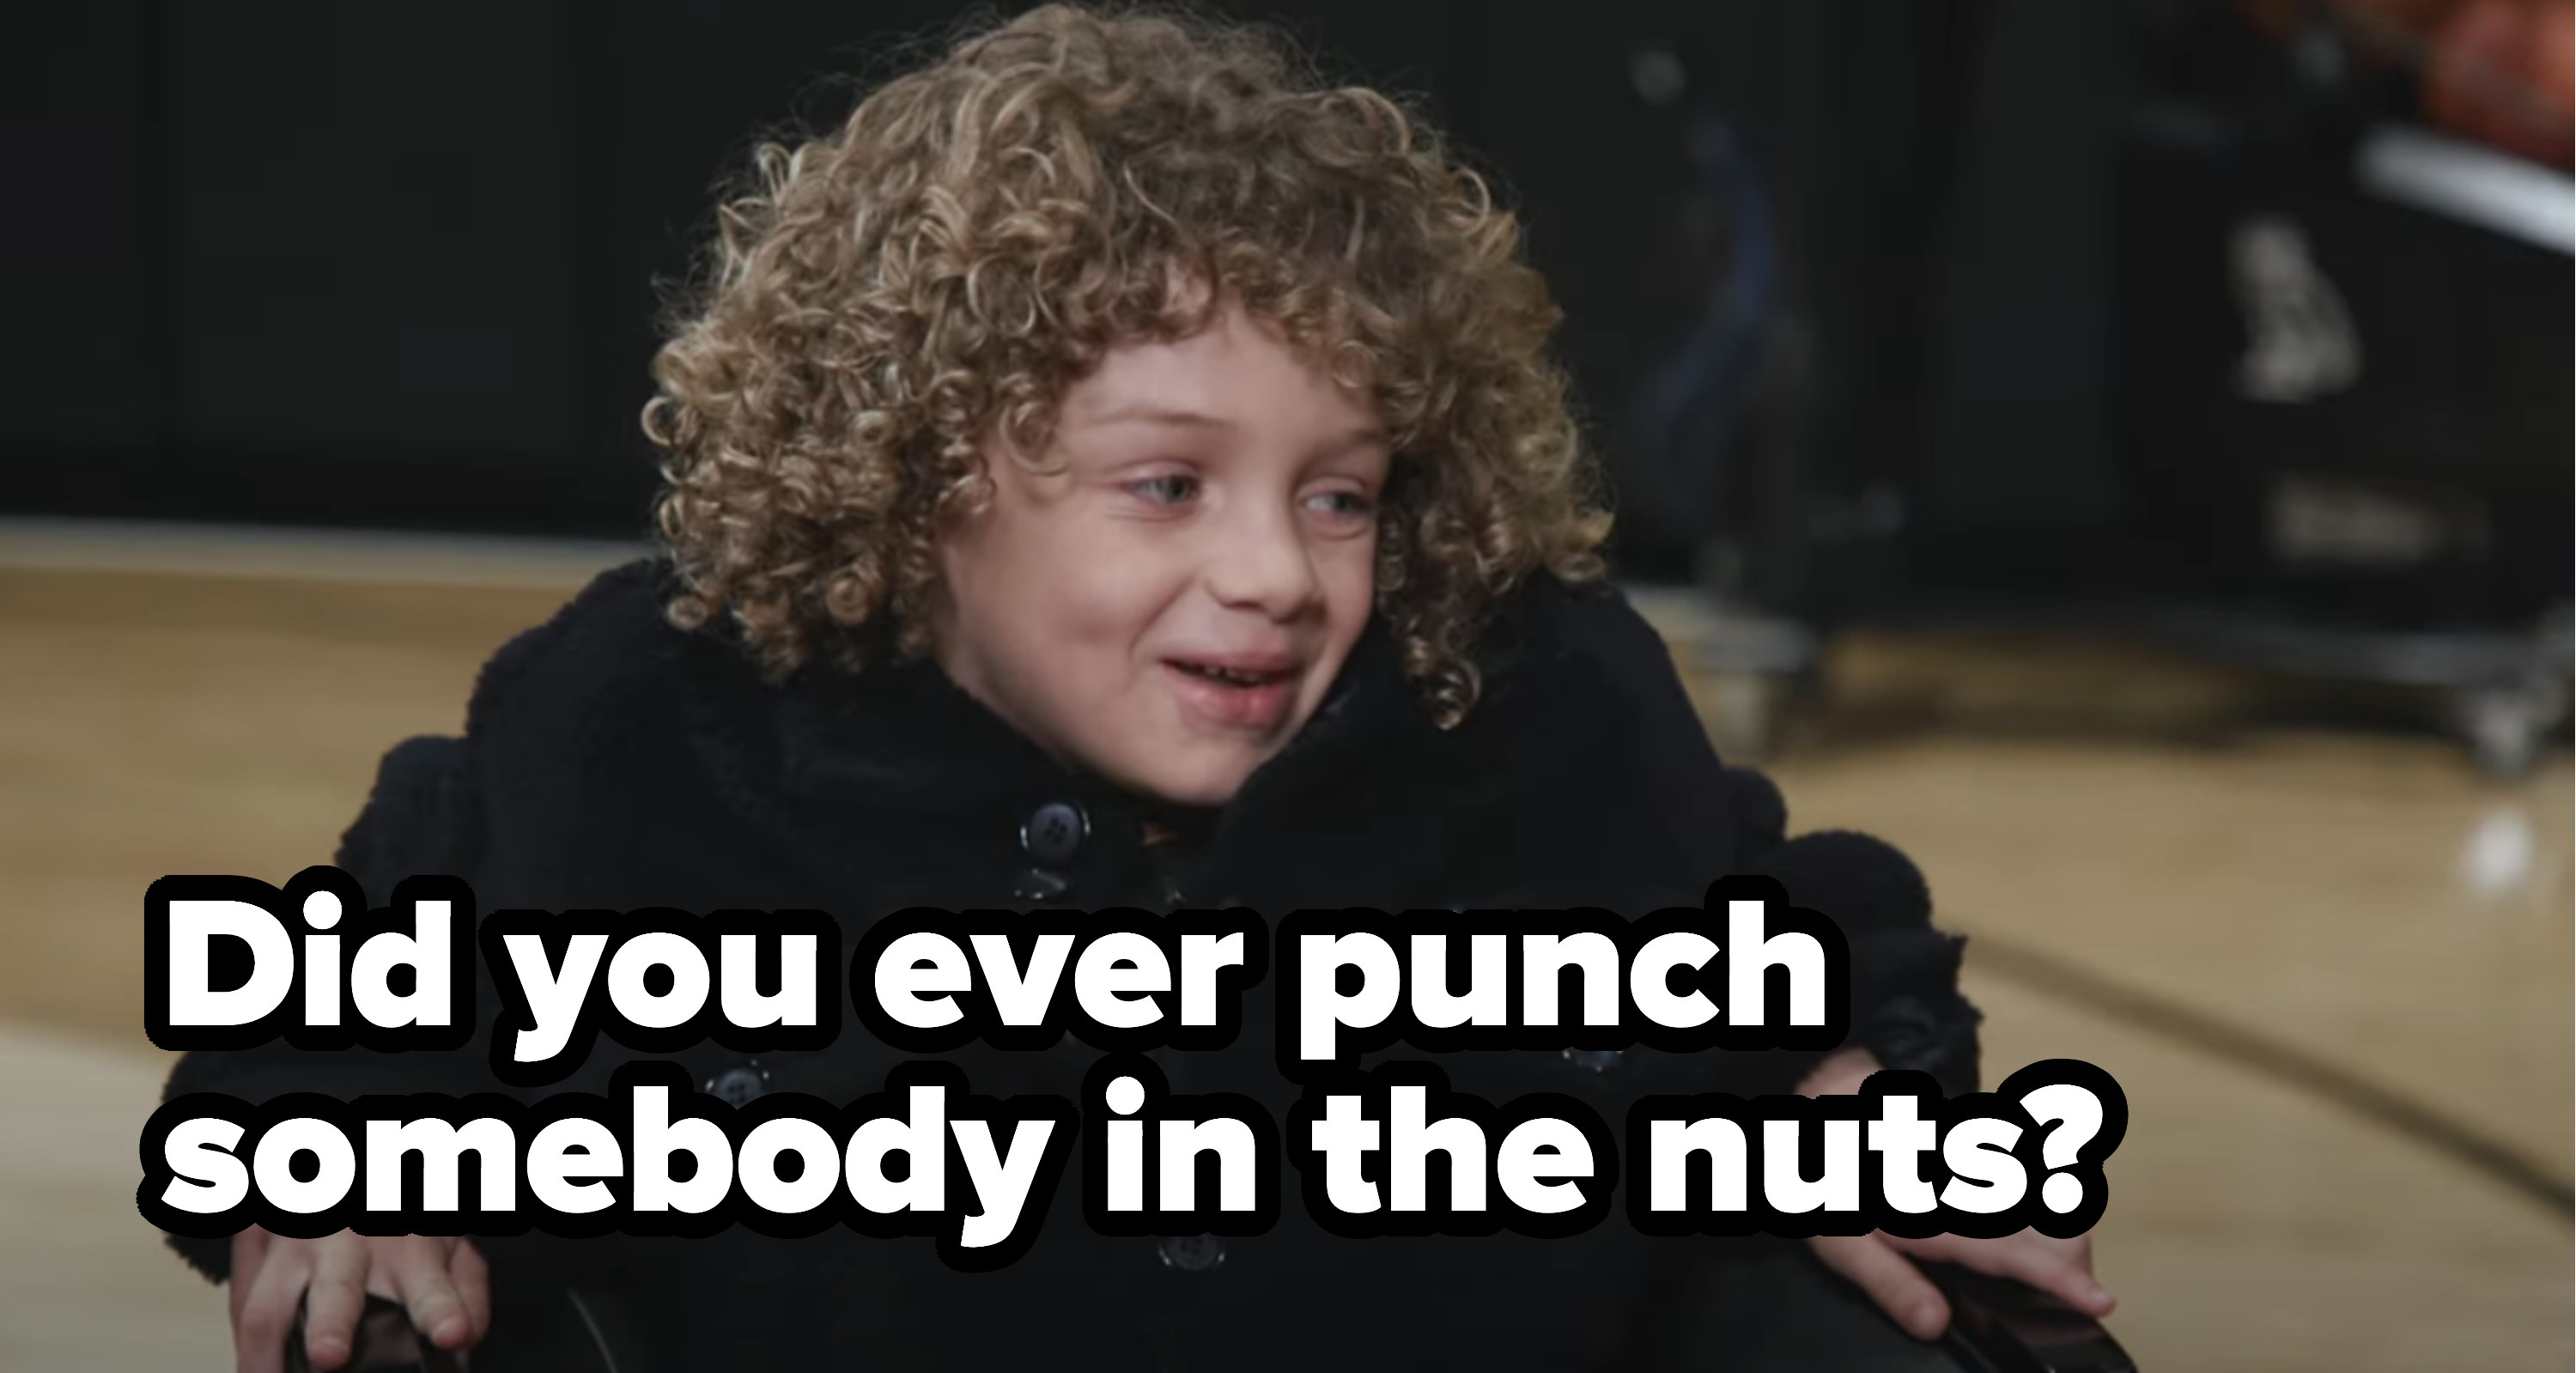 The interviewer asked &quot;Did you ever punch somebody in the nuts?&quot;